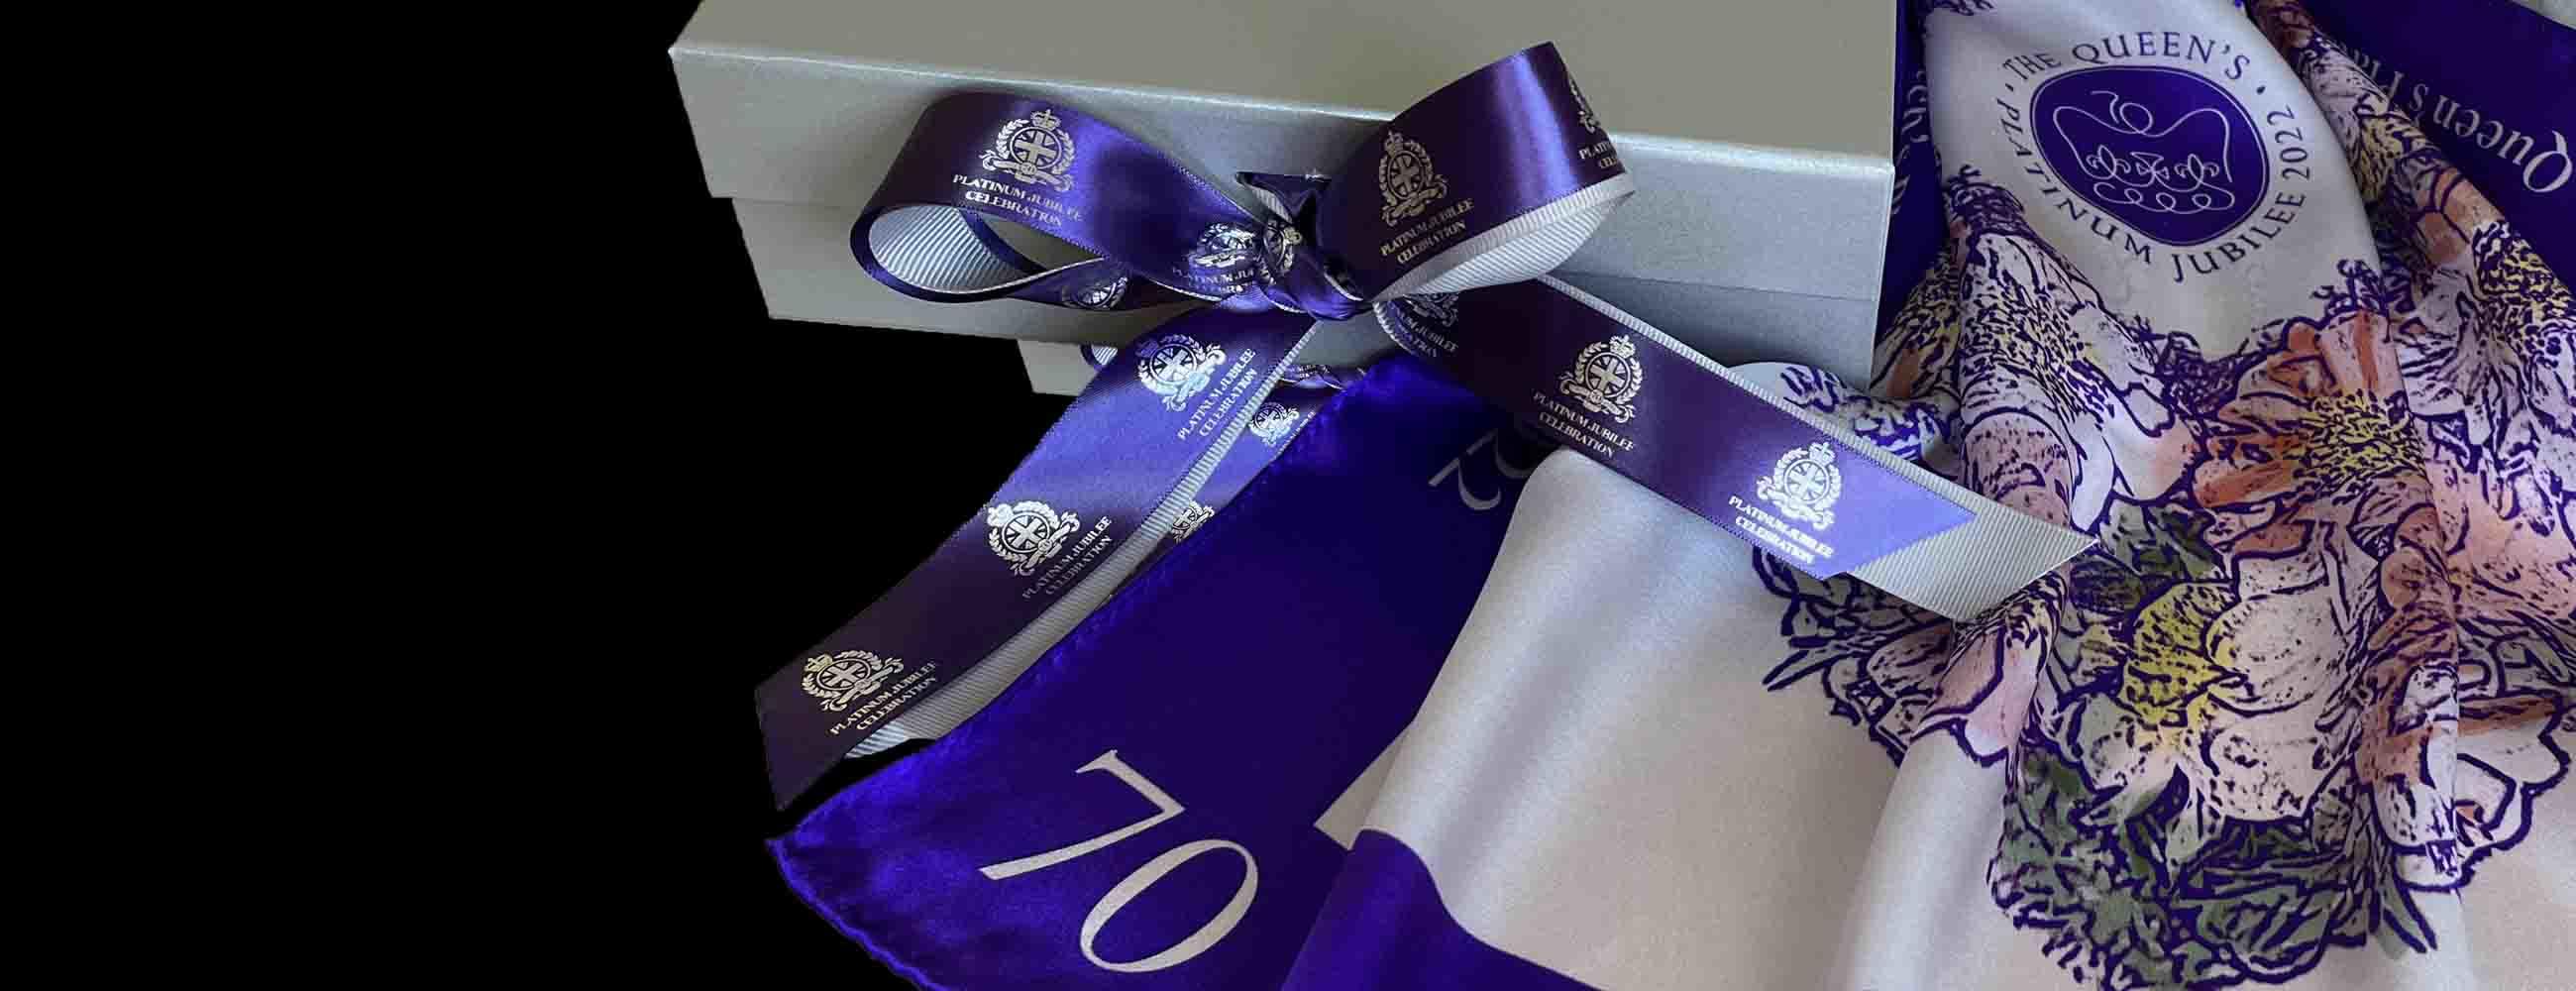 <h2>PLATINUM JUBILEE SCARF</h2><p>70 scarves for 70 years</p>